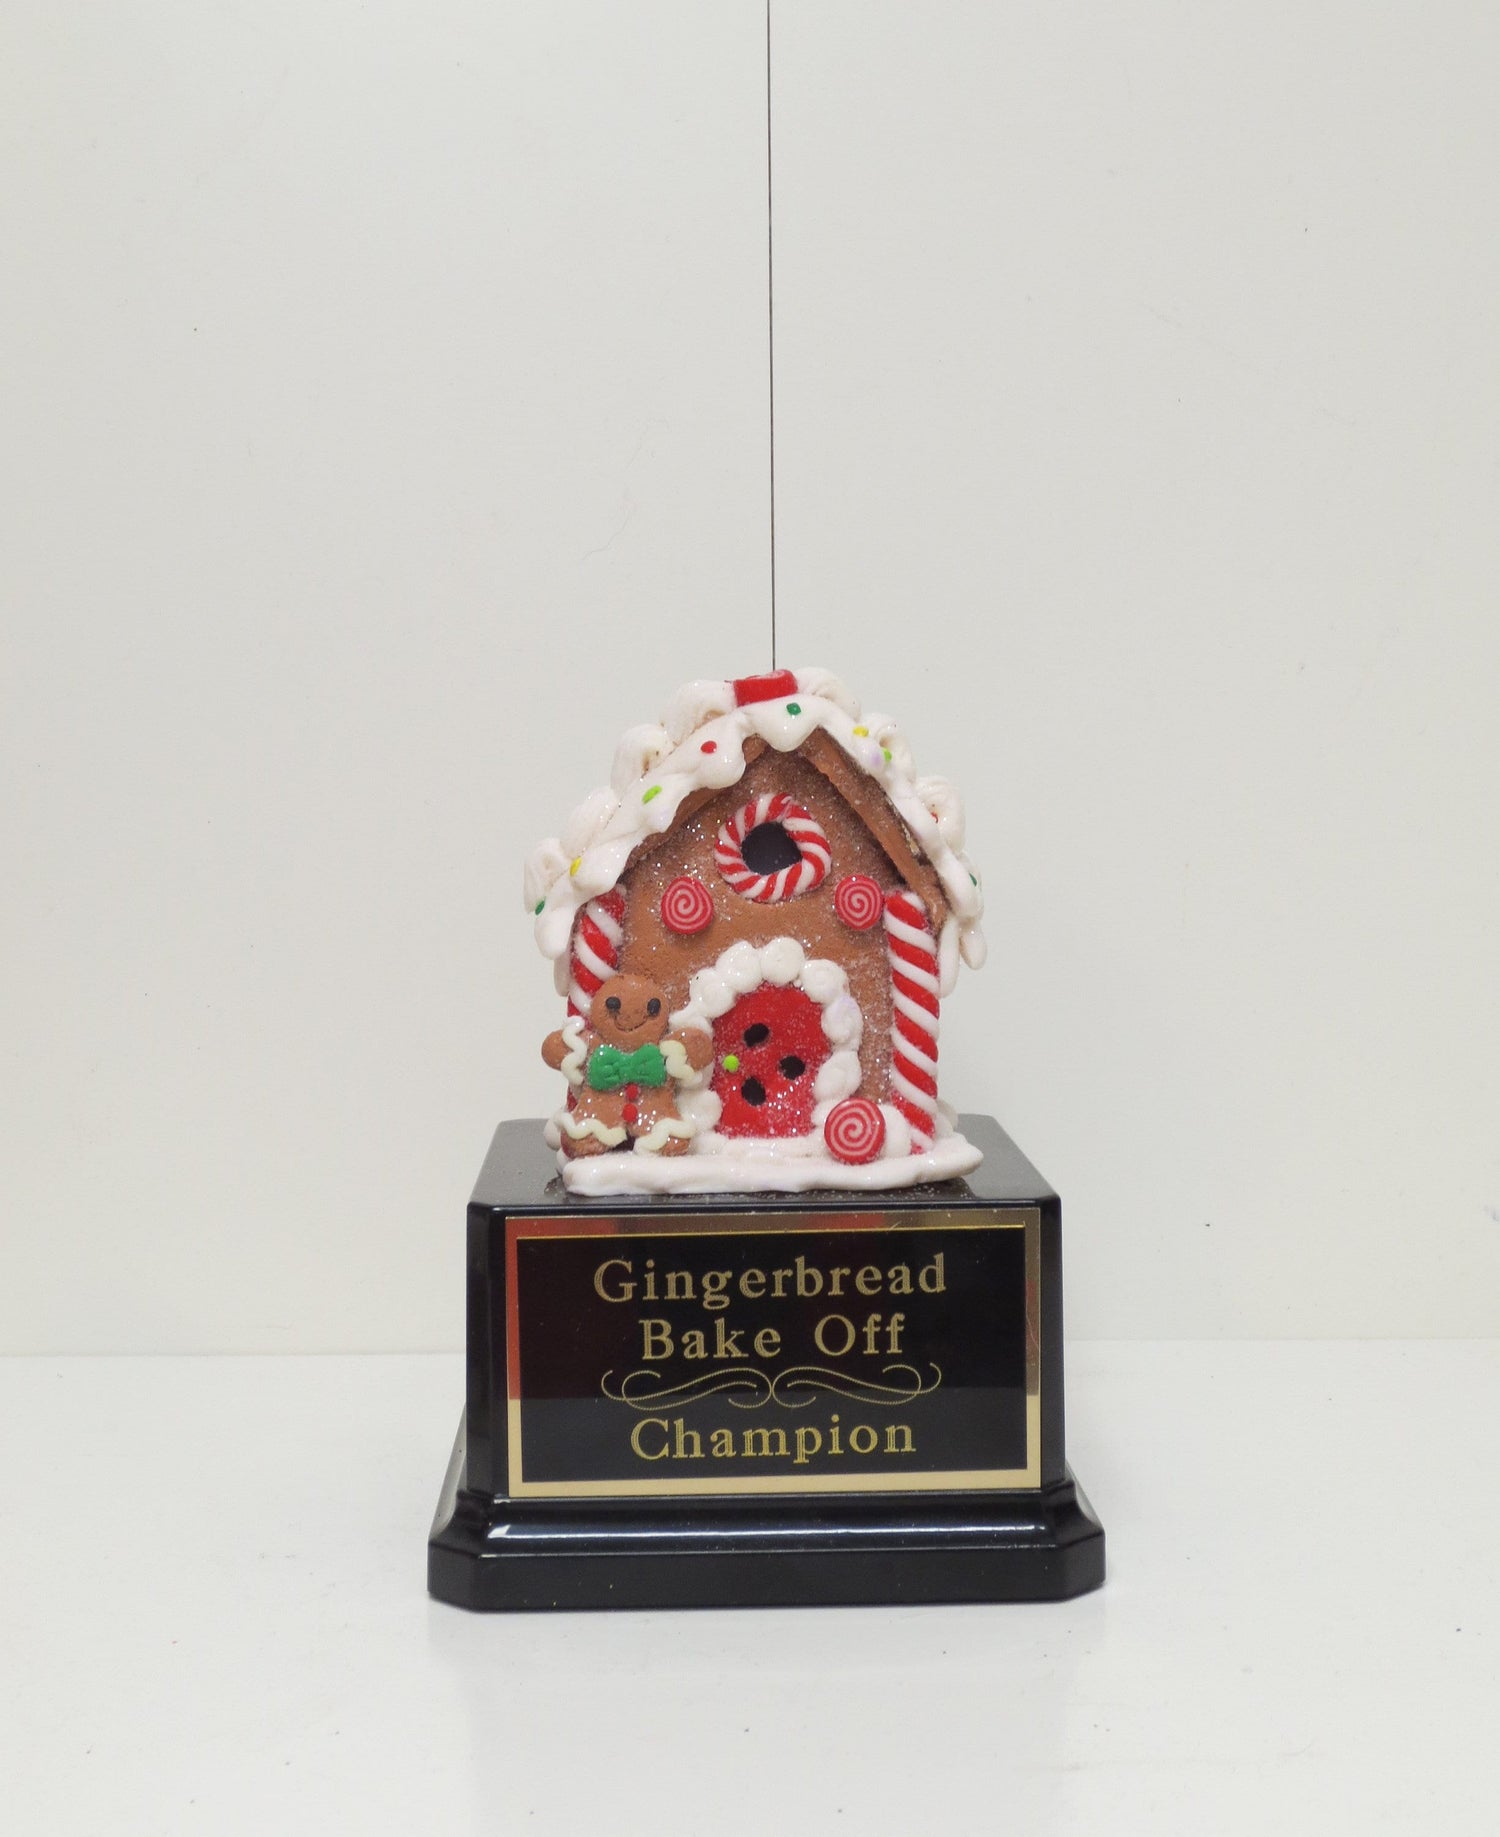 Gingerbread House Cookie Decorating Champion Bake Off Trophy Ugly Sweater Trophy Contest Award Winner Gingerbread Man Christmas Decor